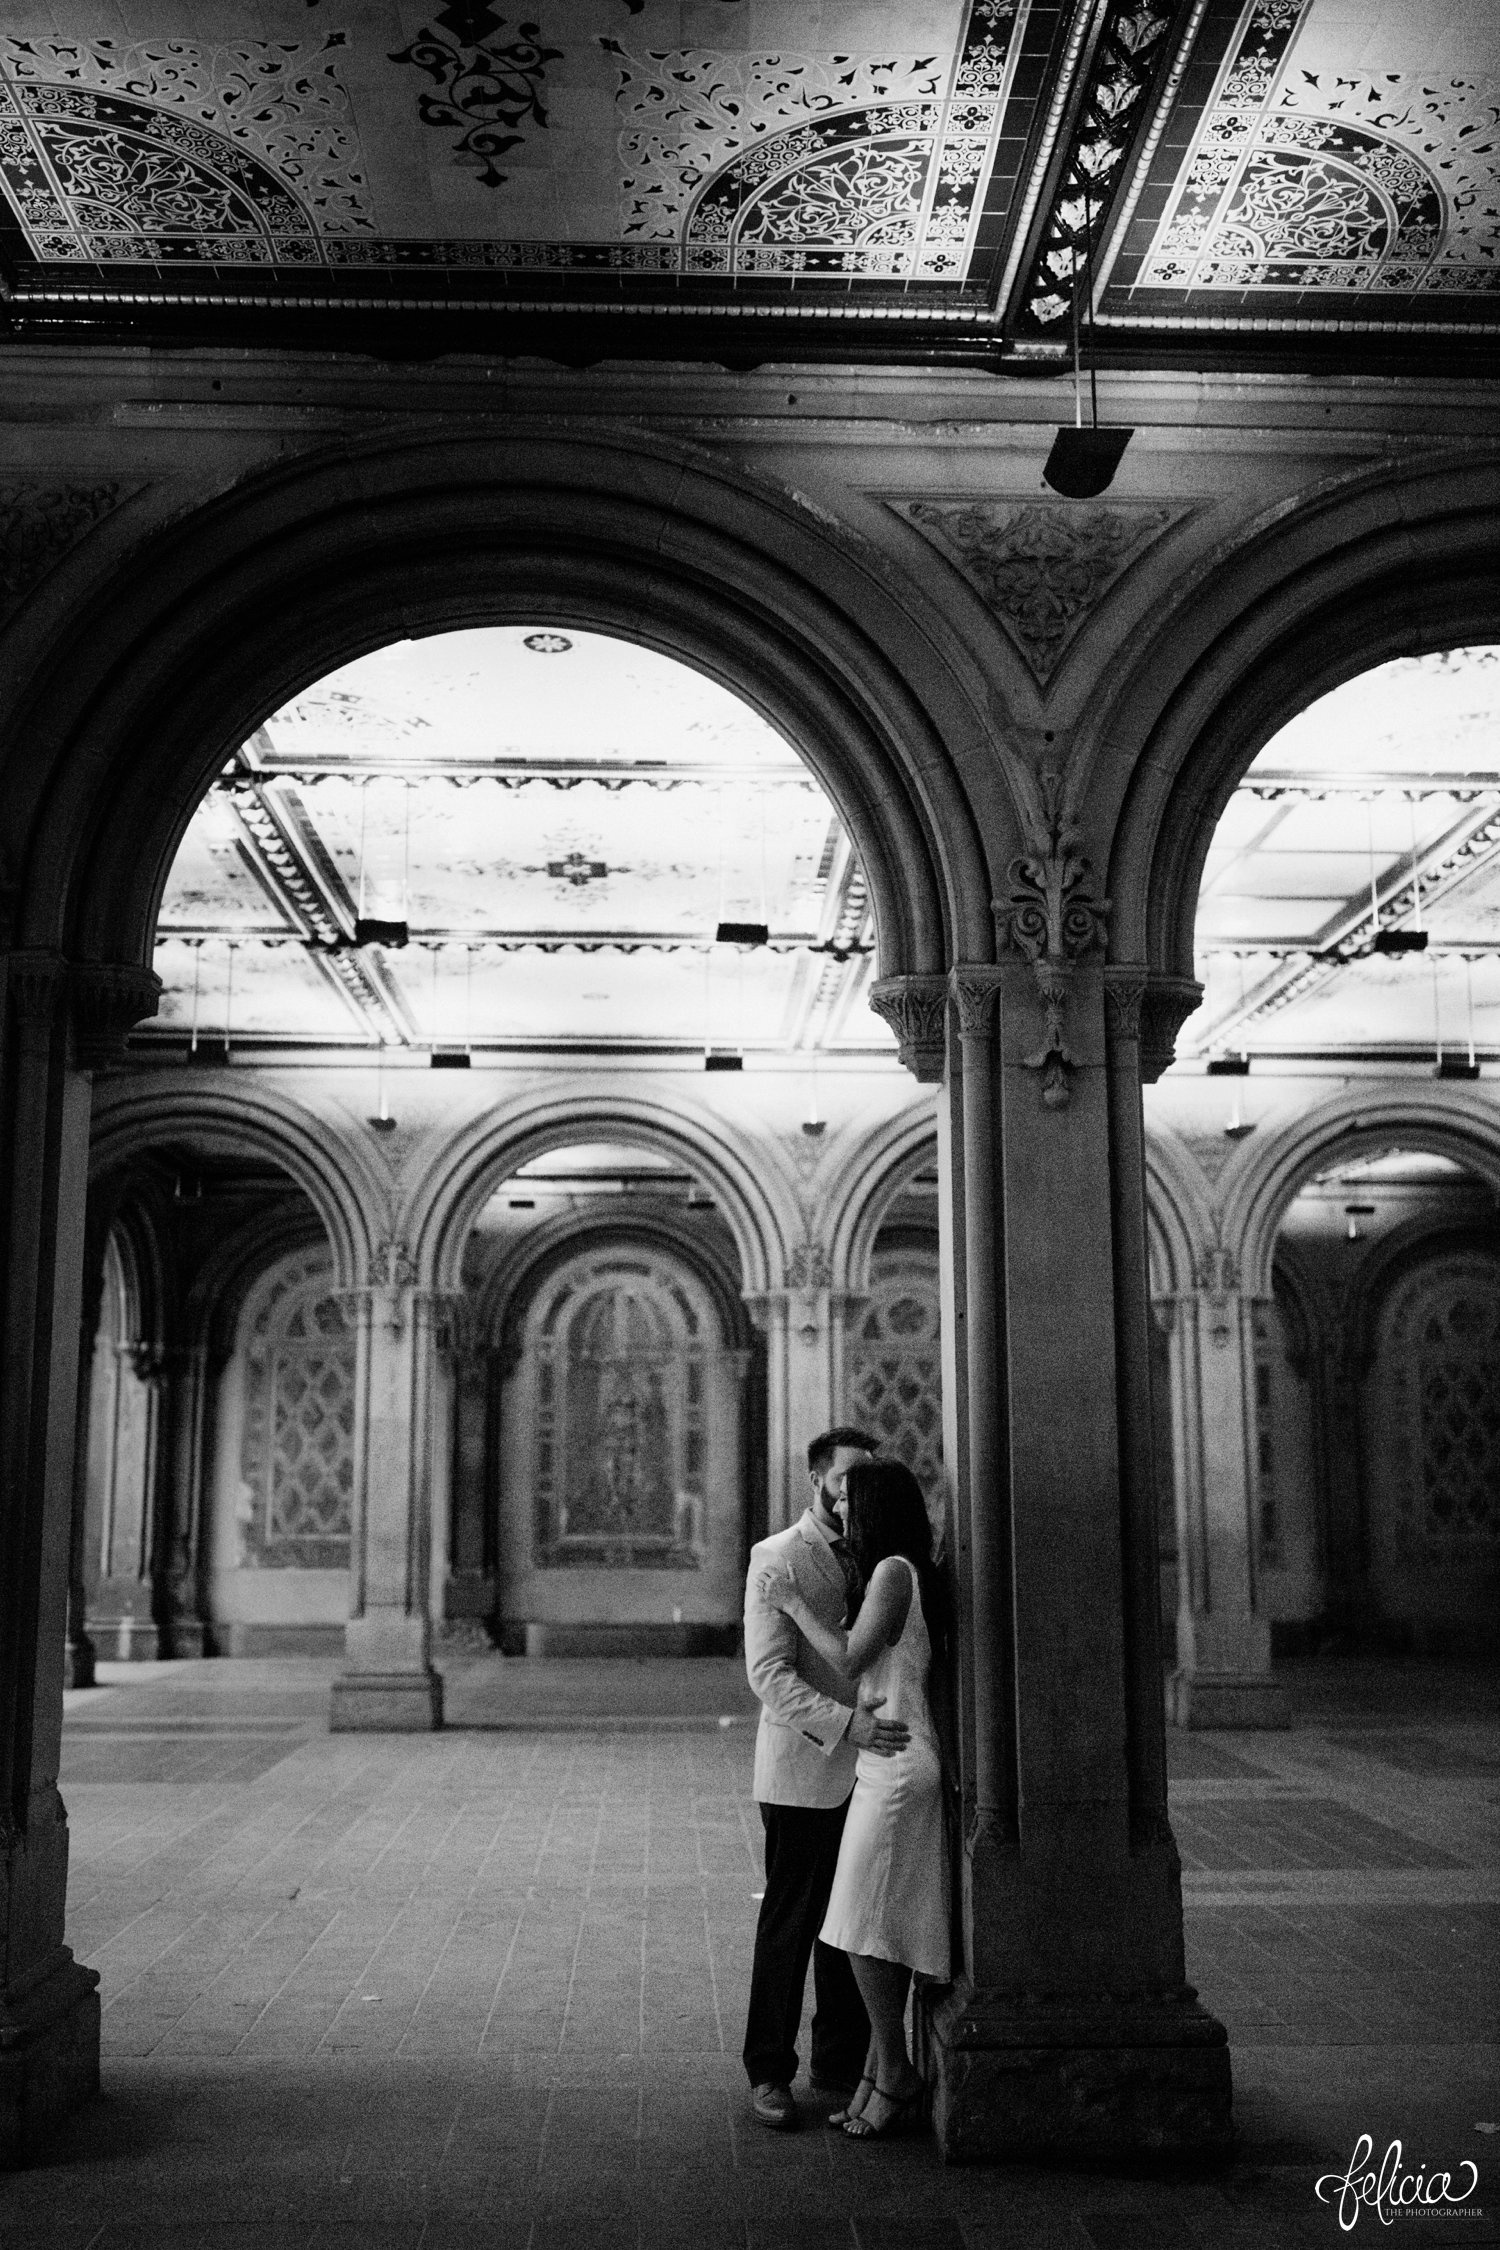 images by feliciathephotographer.com | destination wedding photographer | elopement | new york city | second look | bethesda | central park | detailed ceiling | architecture | romantic | classic | cowl neck dress | black and white | 